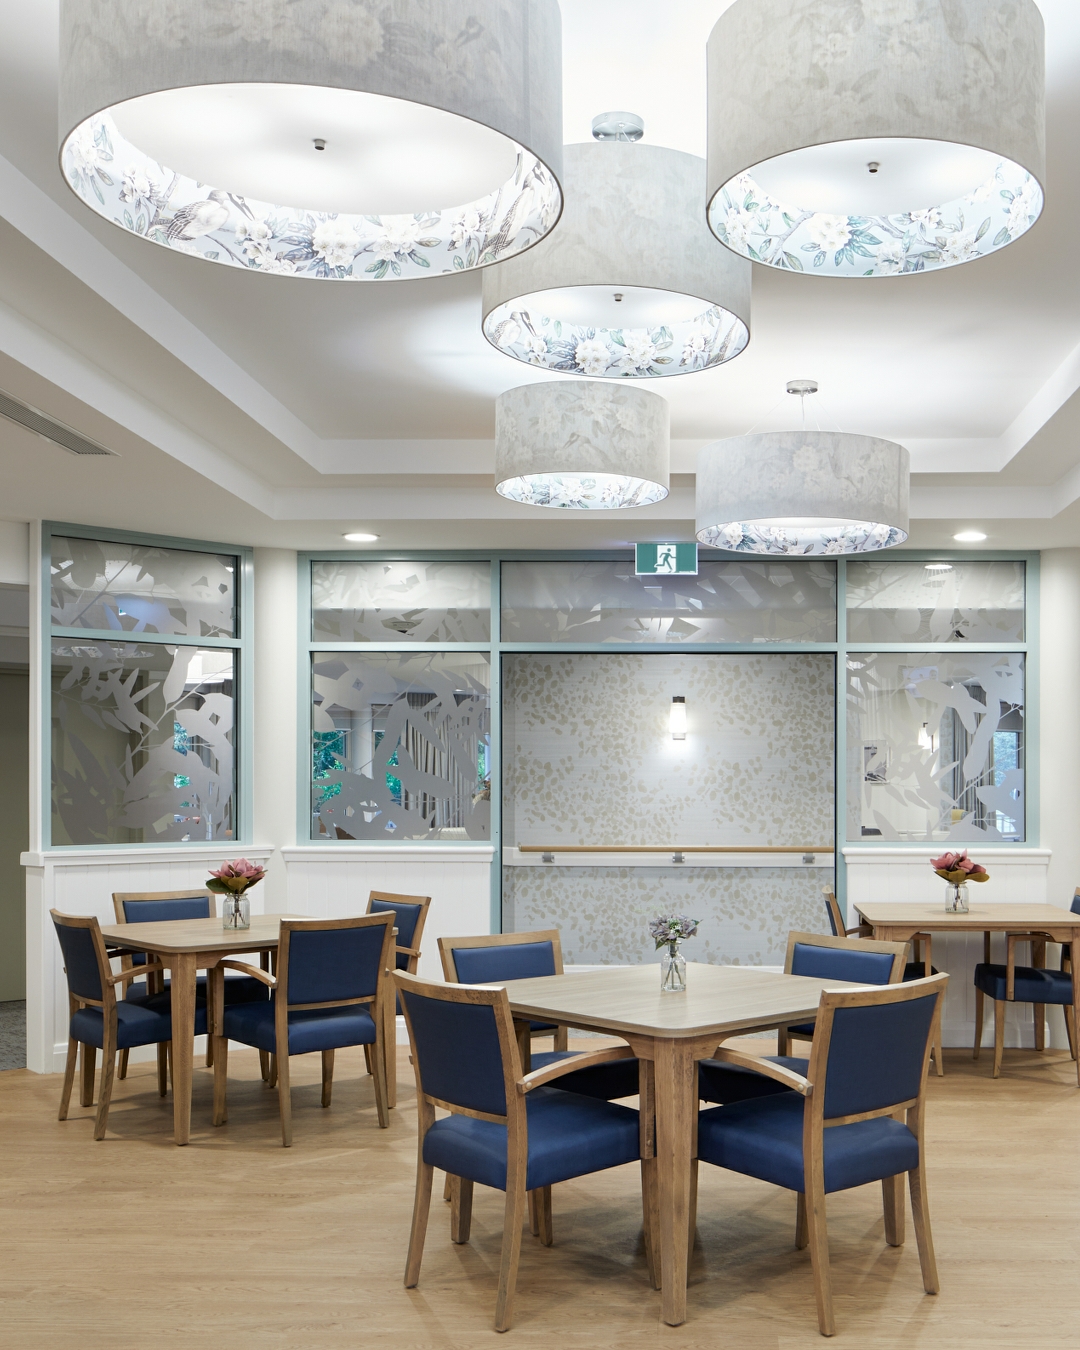 Custom Drum Pendants in an aged care dining room